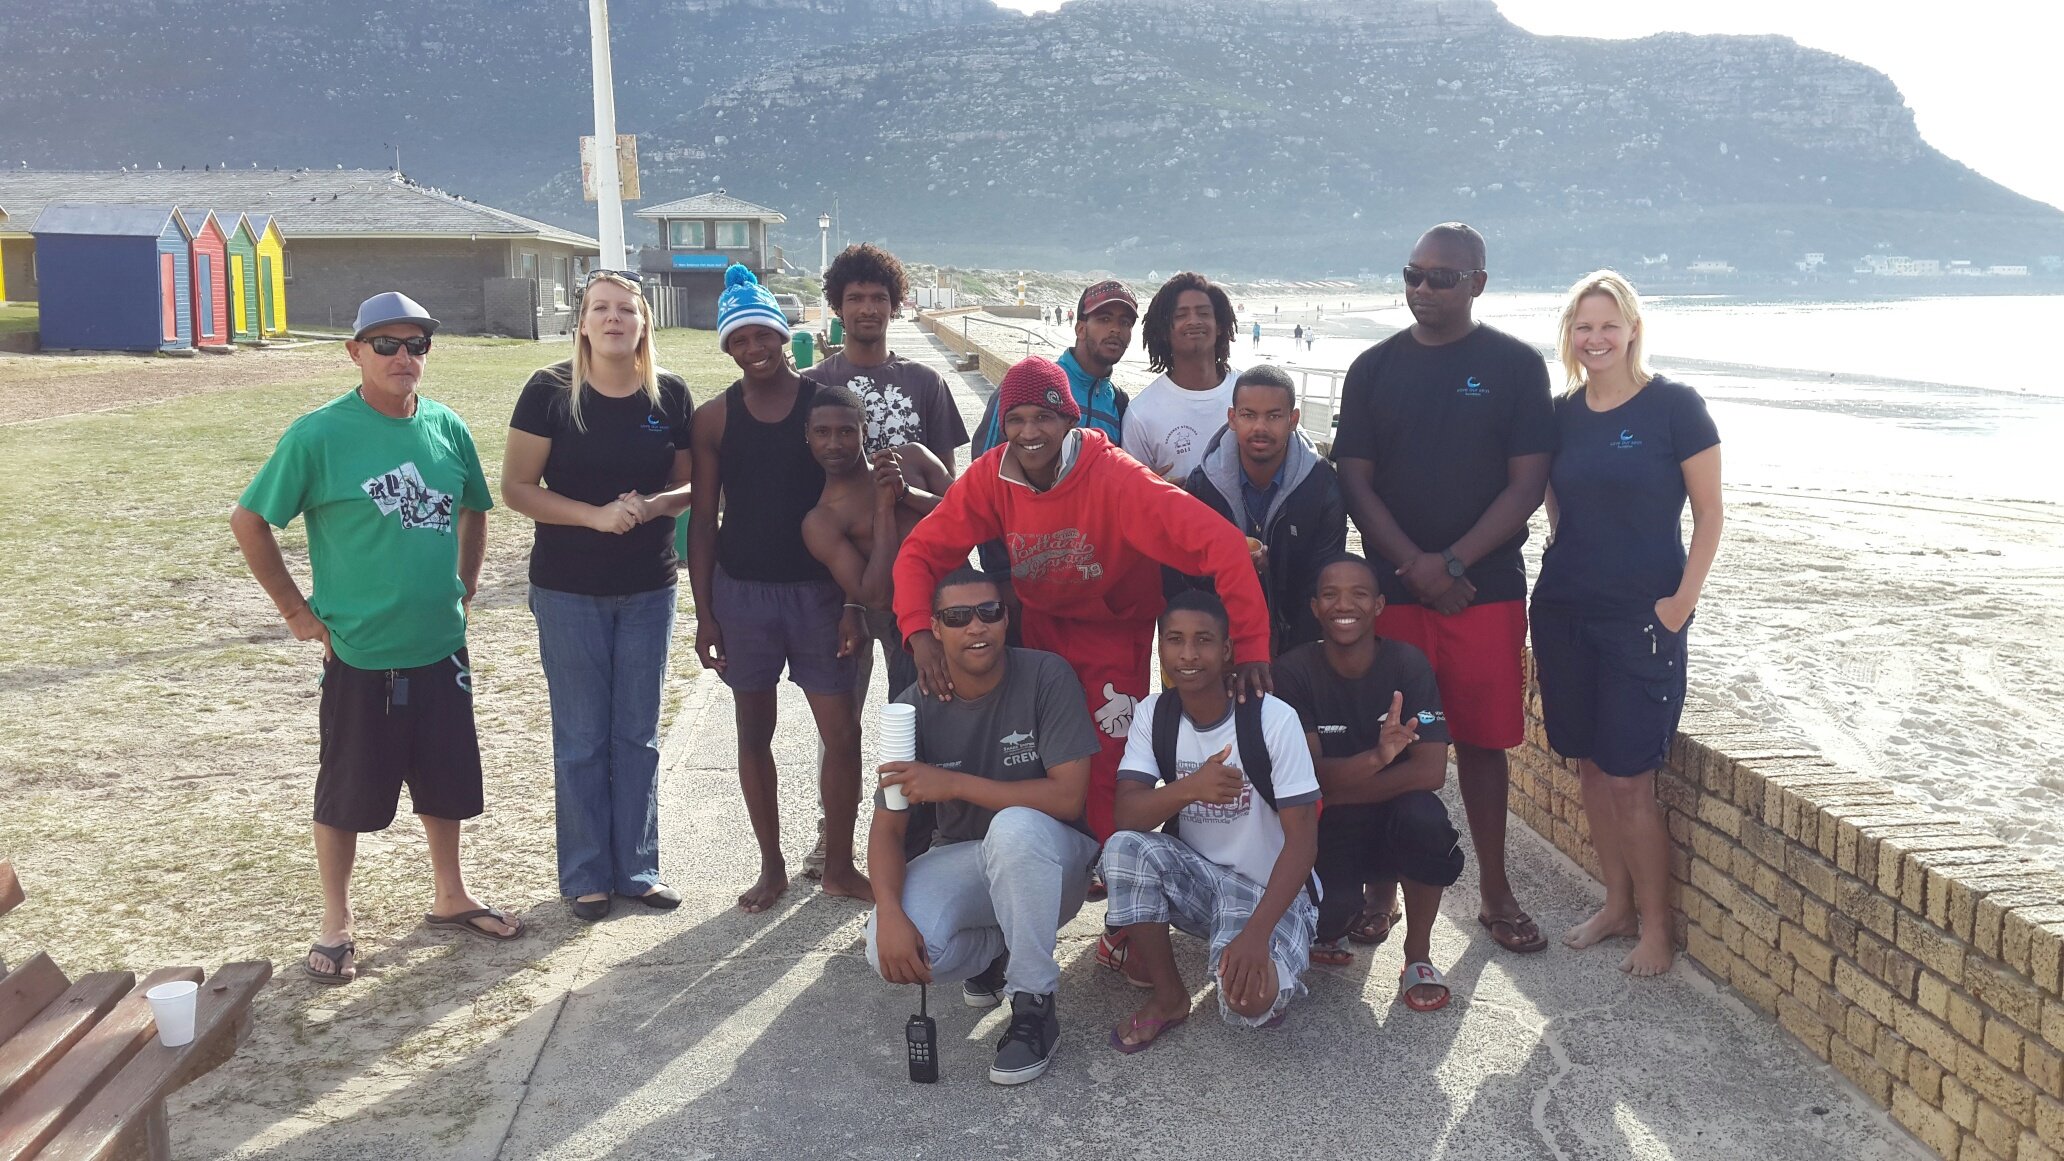 The Fish Hoek exclusion net team at their 130th successful deployment, marking the end of the trial. (c) Shark Spotters